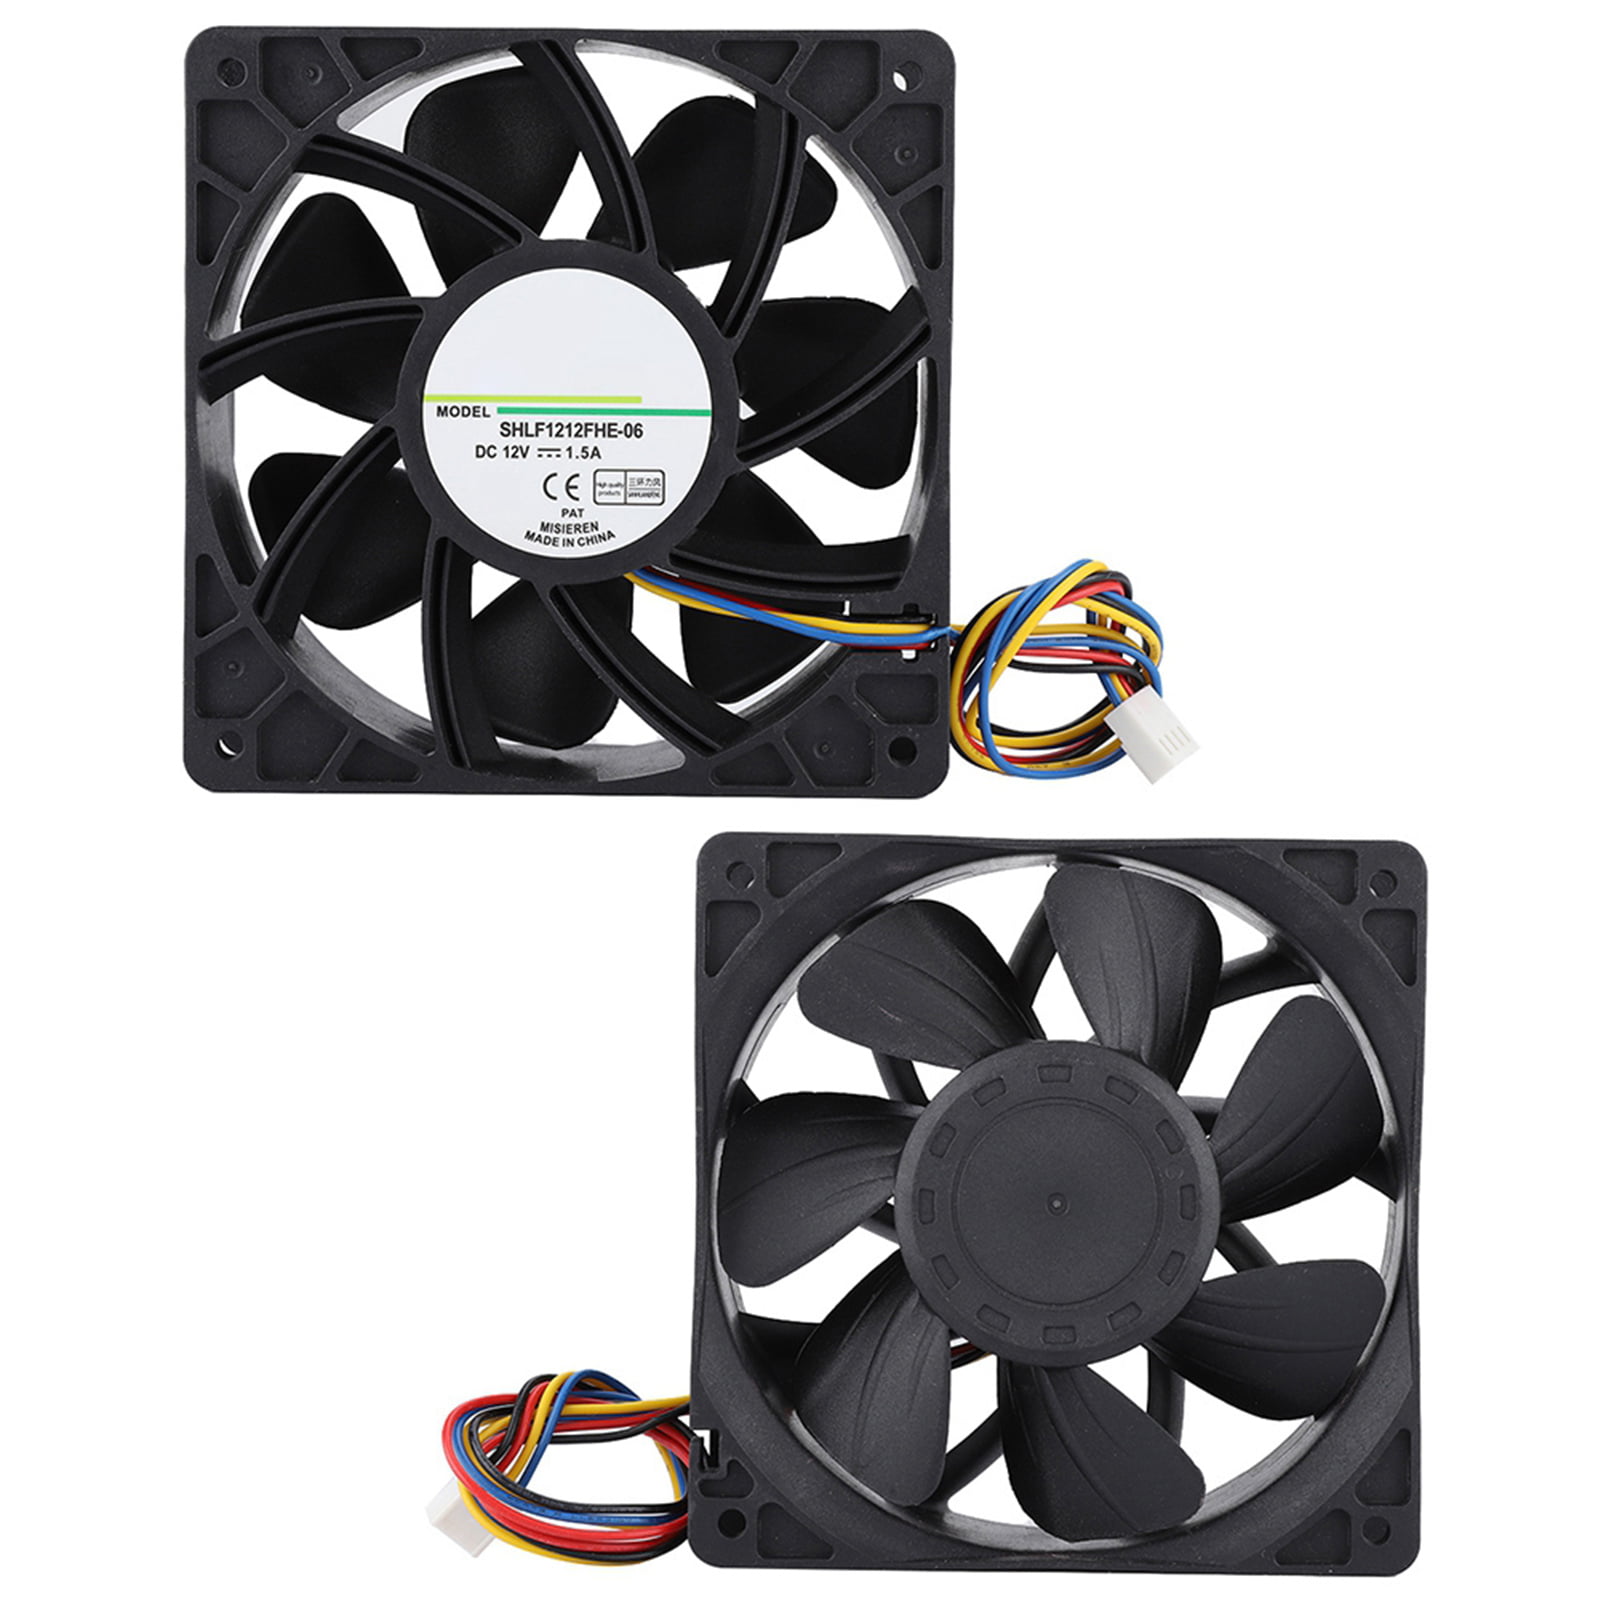 Pokerty Mini Cooling Fan SHLF1224VBE-46 DC24V 12CM Industrial Chassis Fast Heat Dissipation Cooling Fan Cooler 